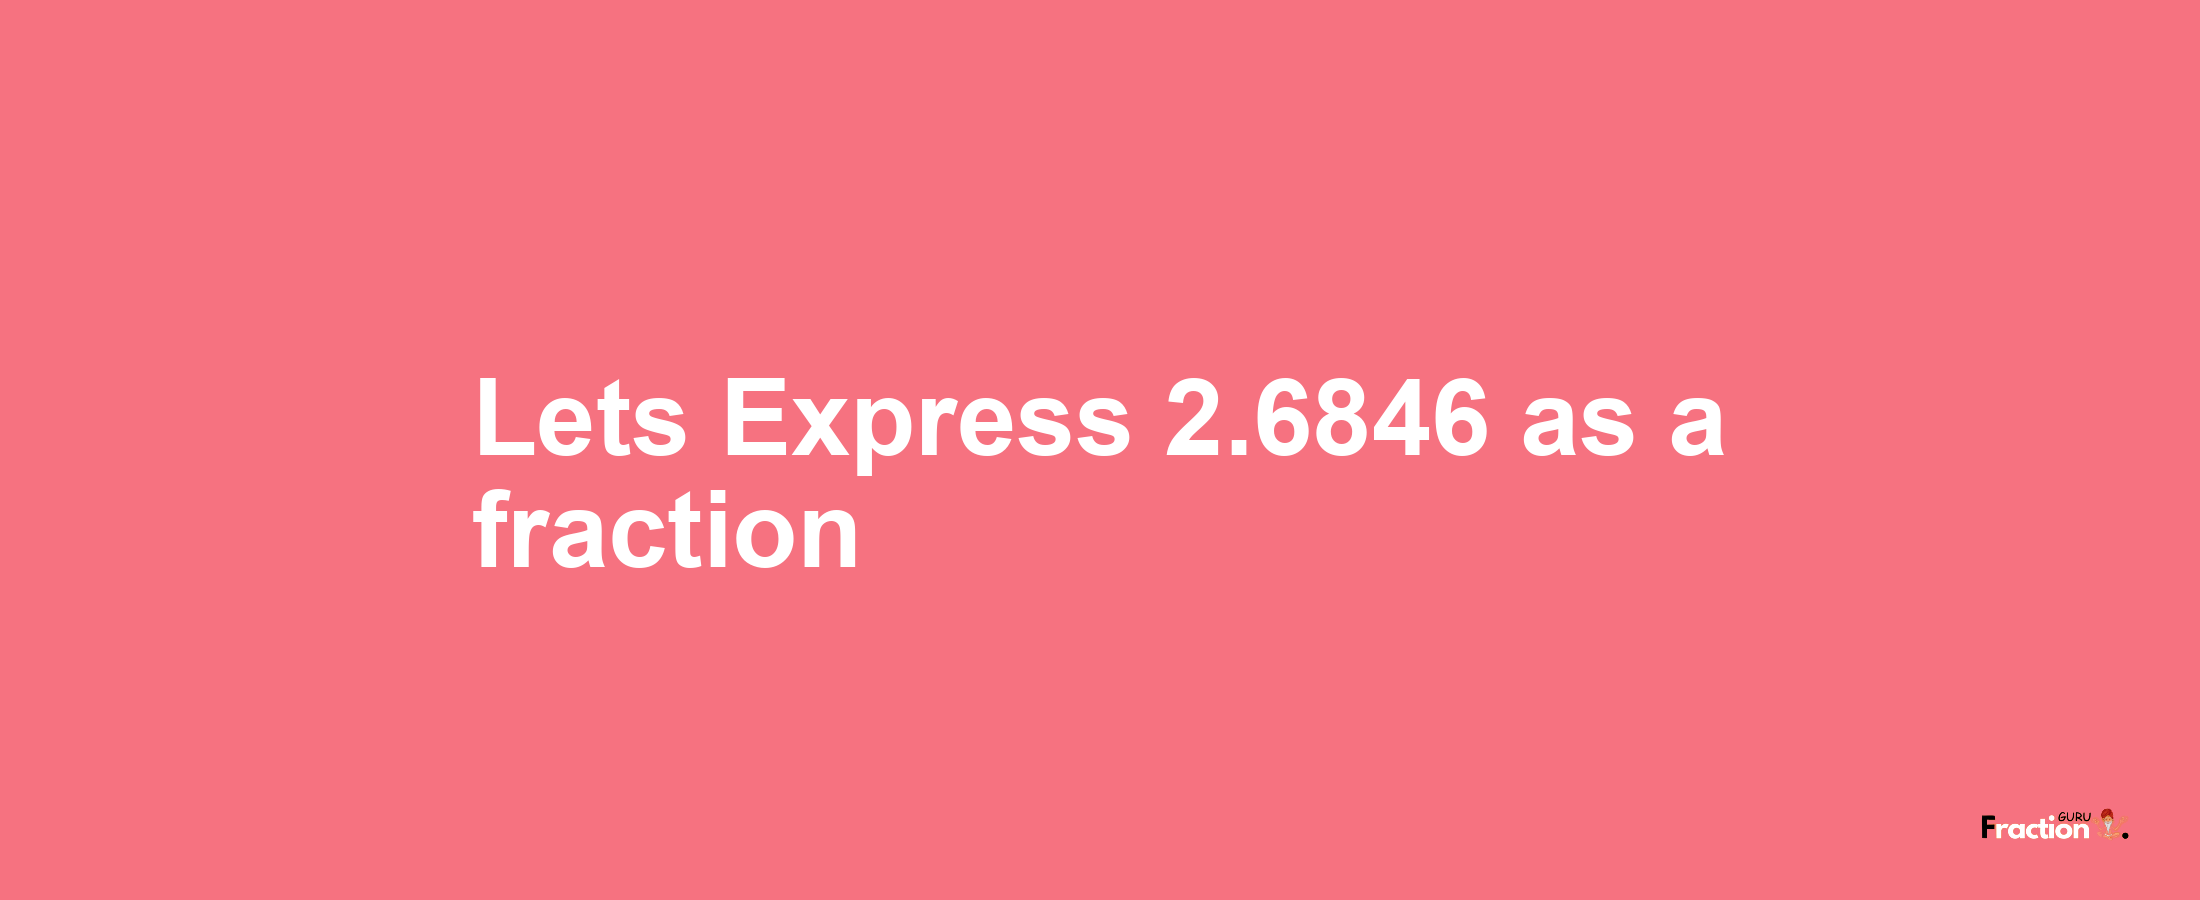 Lets Express 2.6846 as afraction